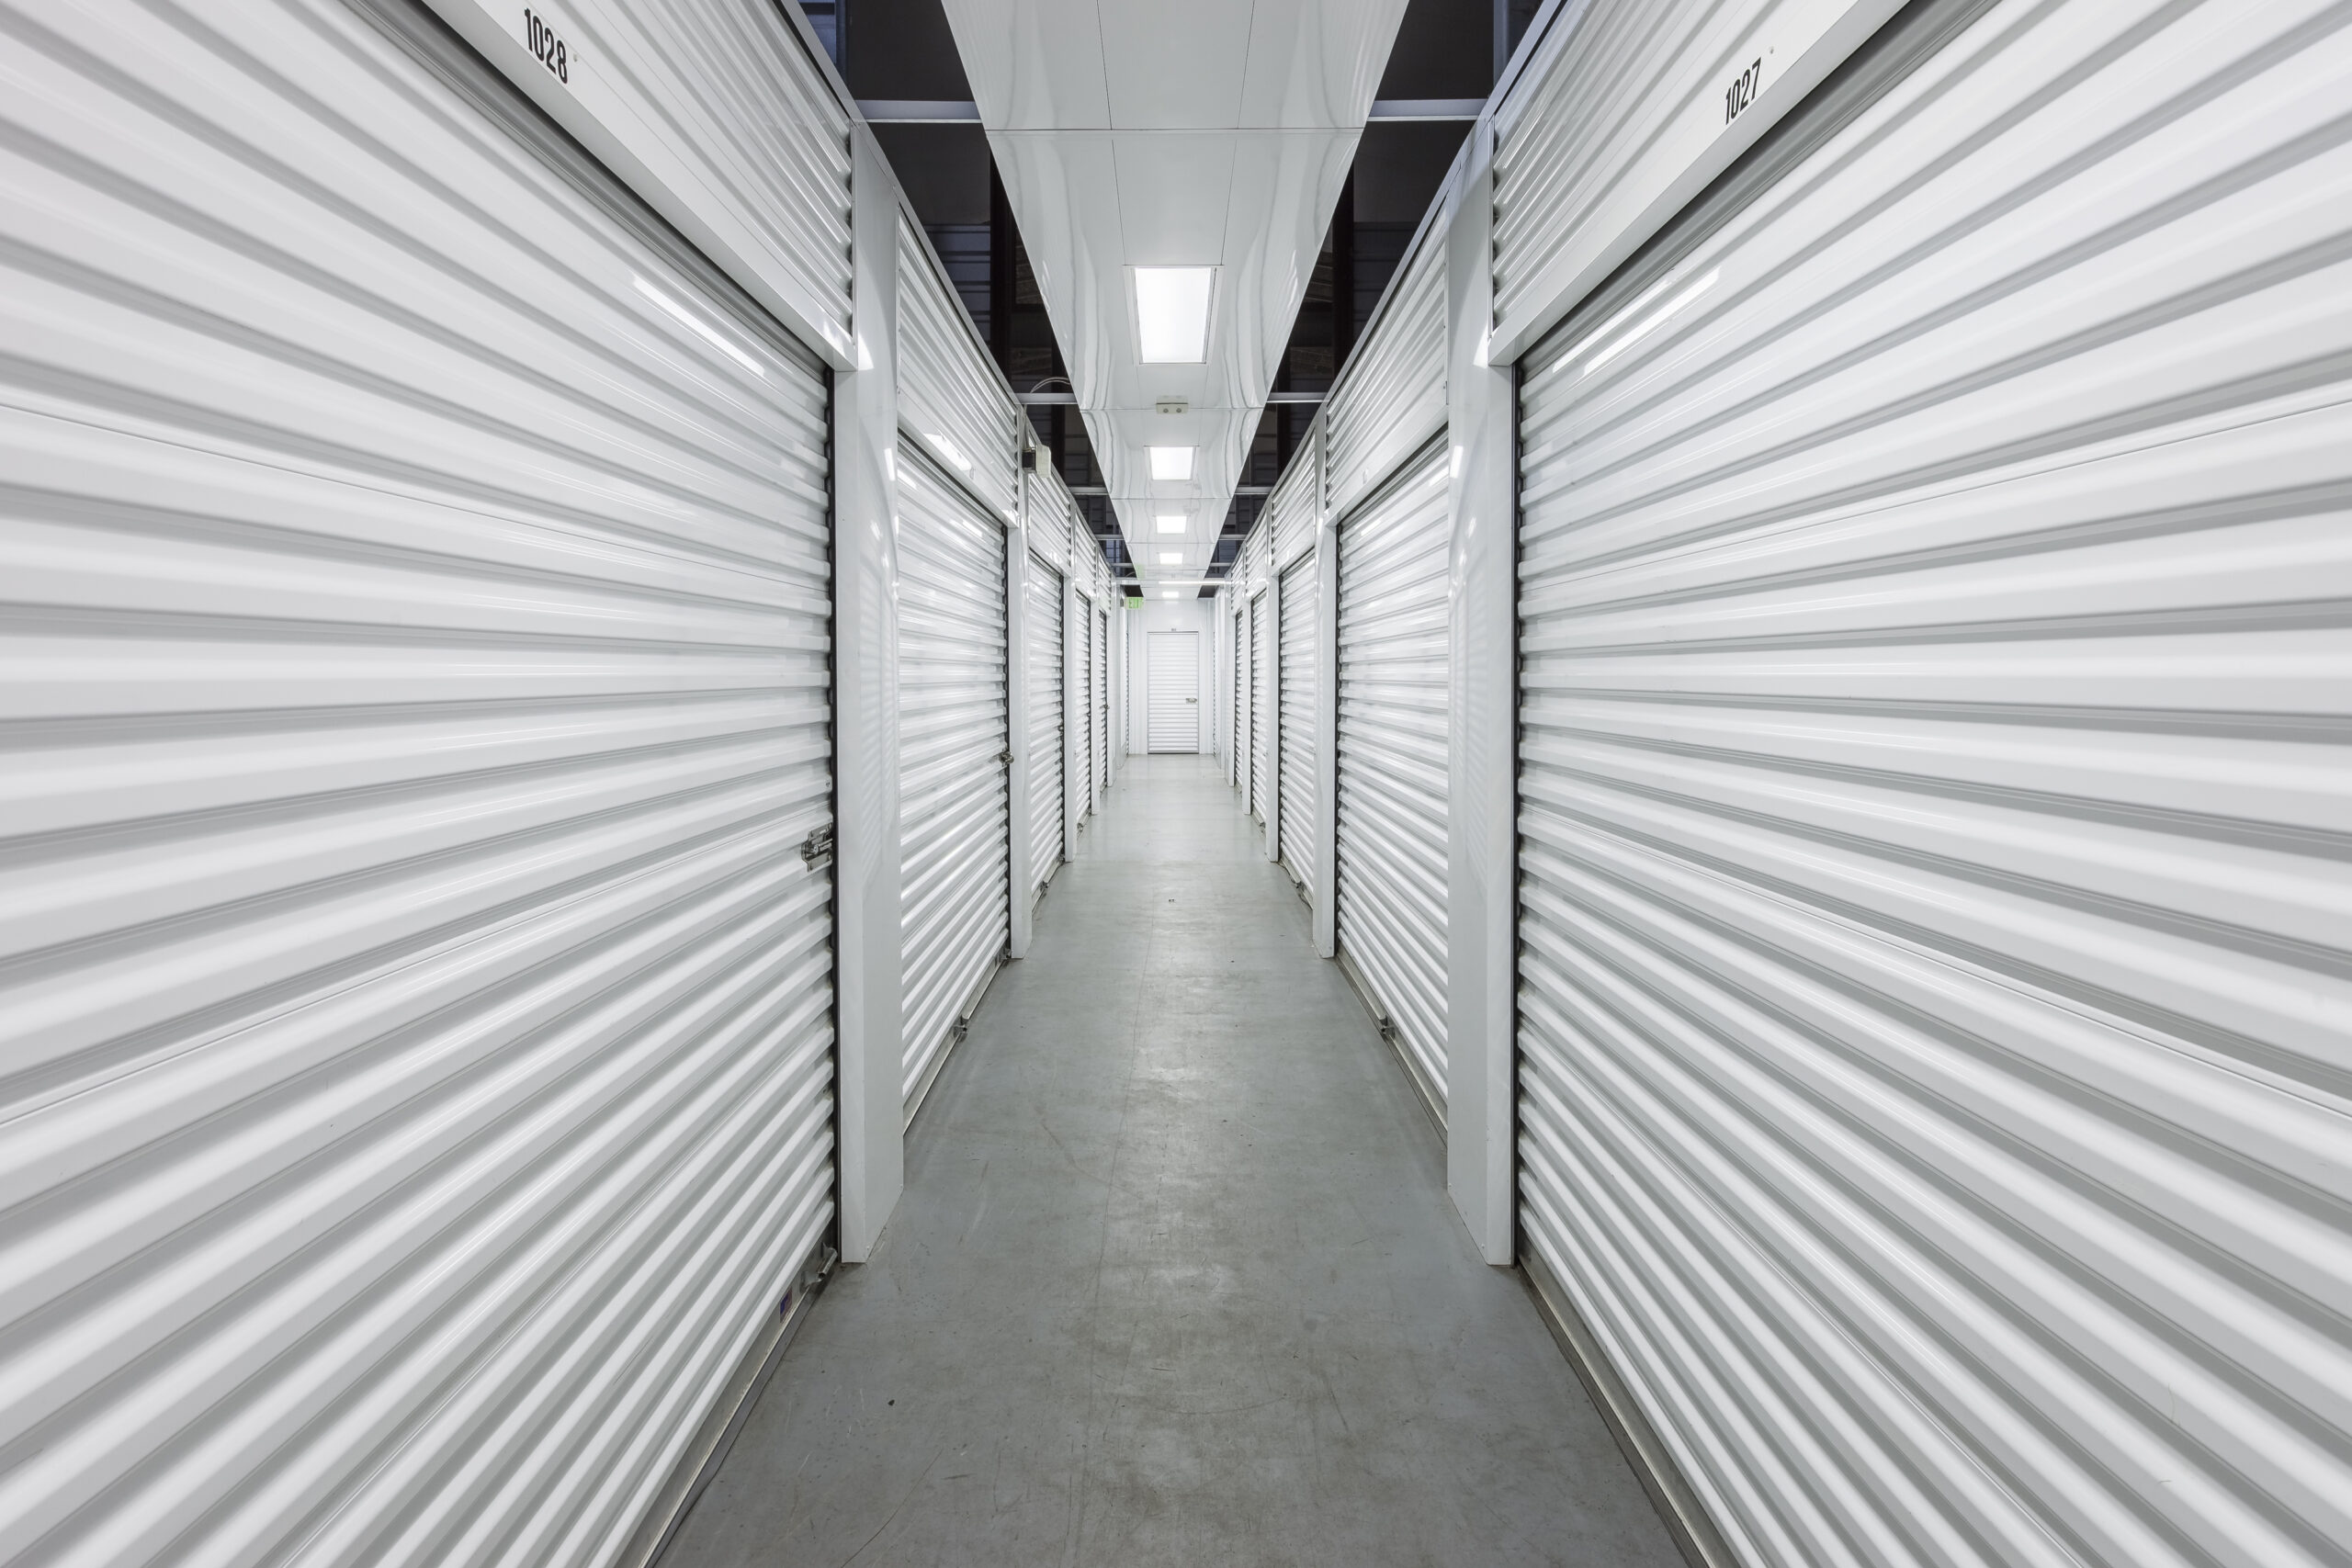 Interior of a climate controlled storage facility.